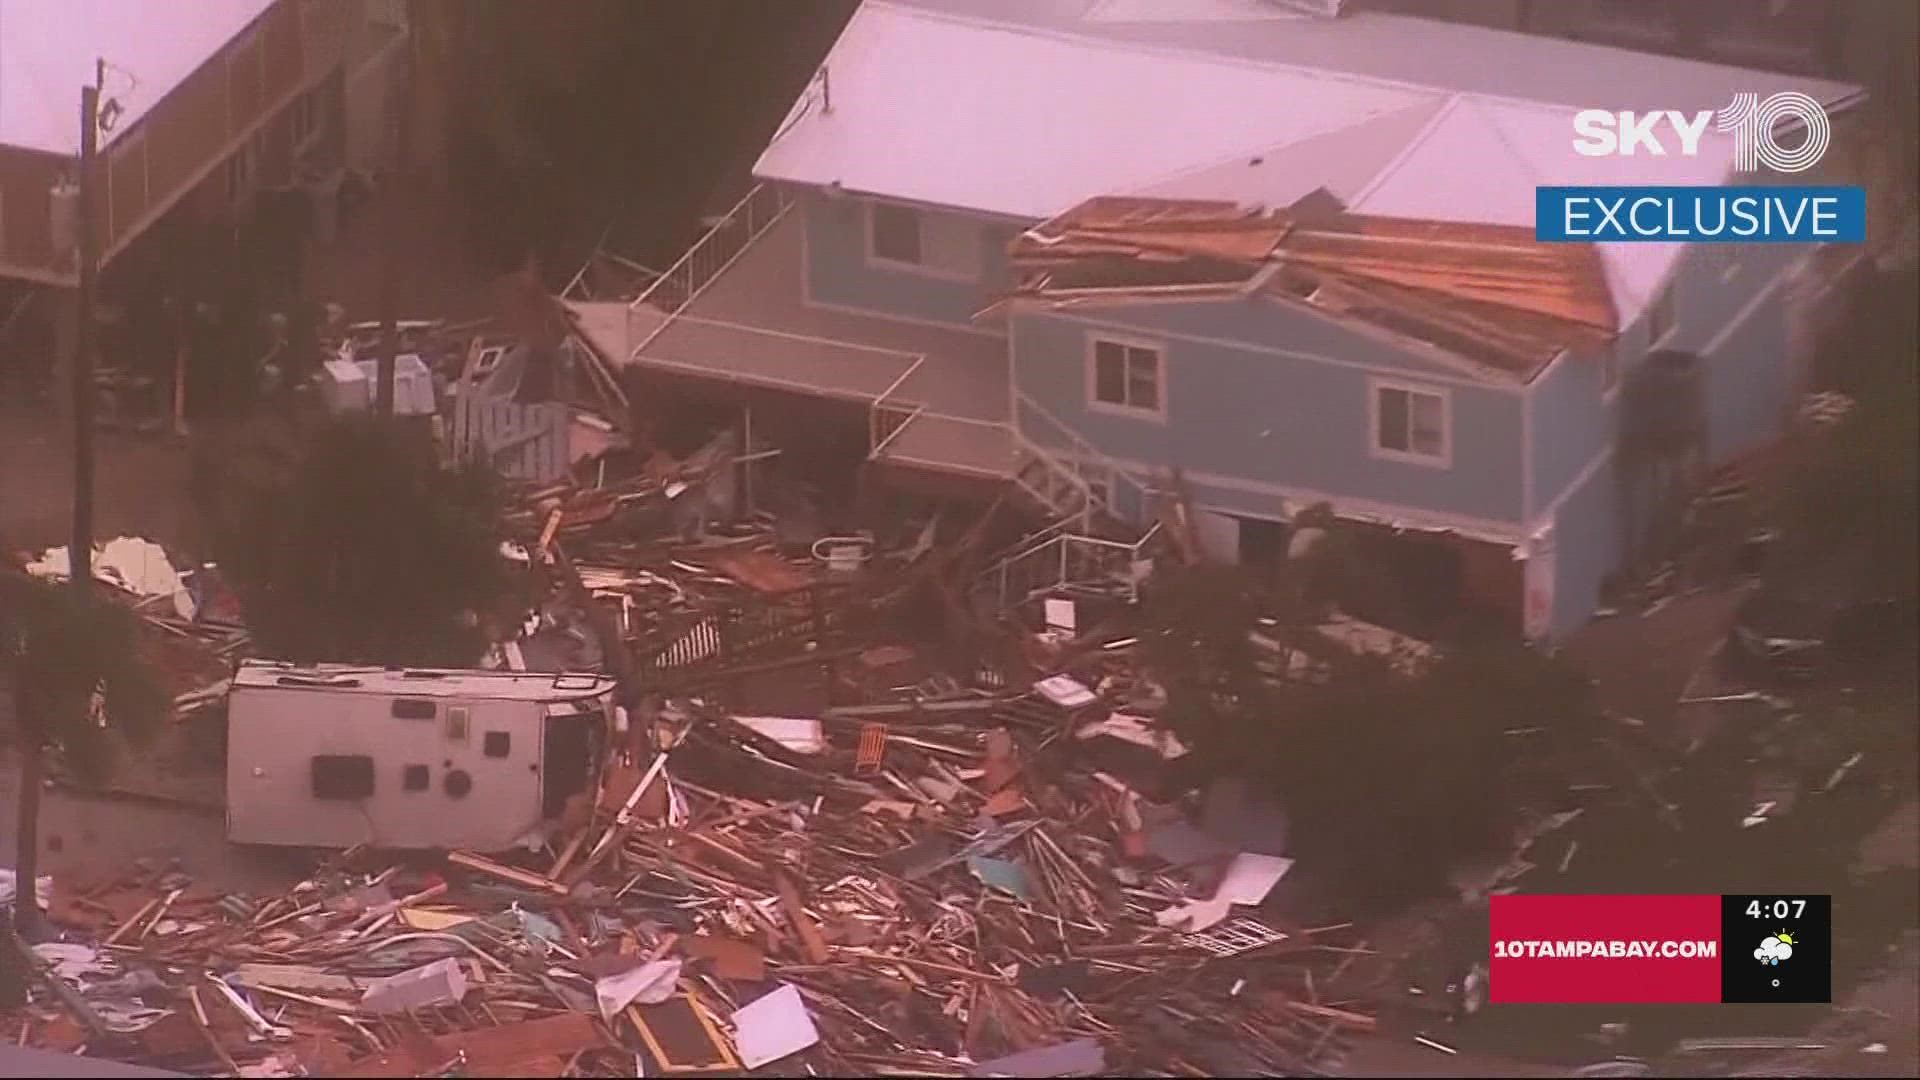 We captured aerial video of southwest Florida where a home is in ruins.